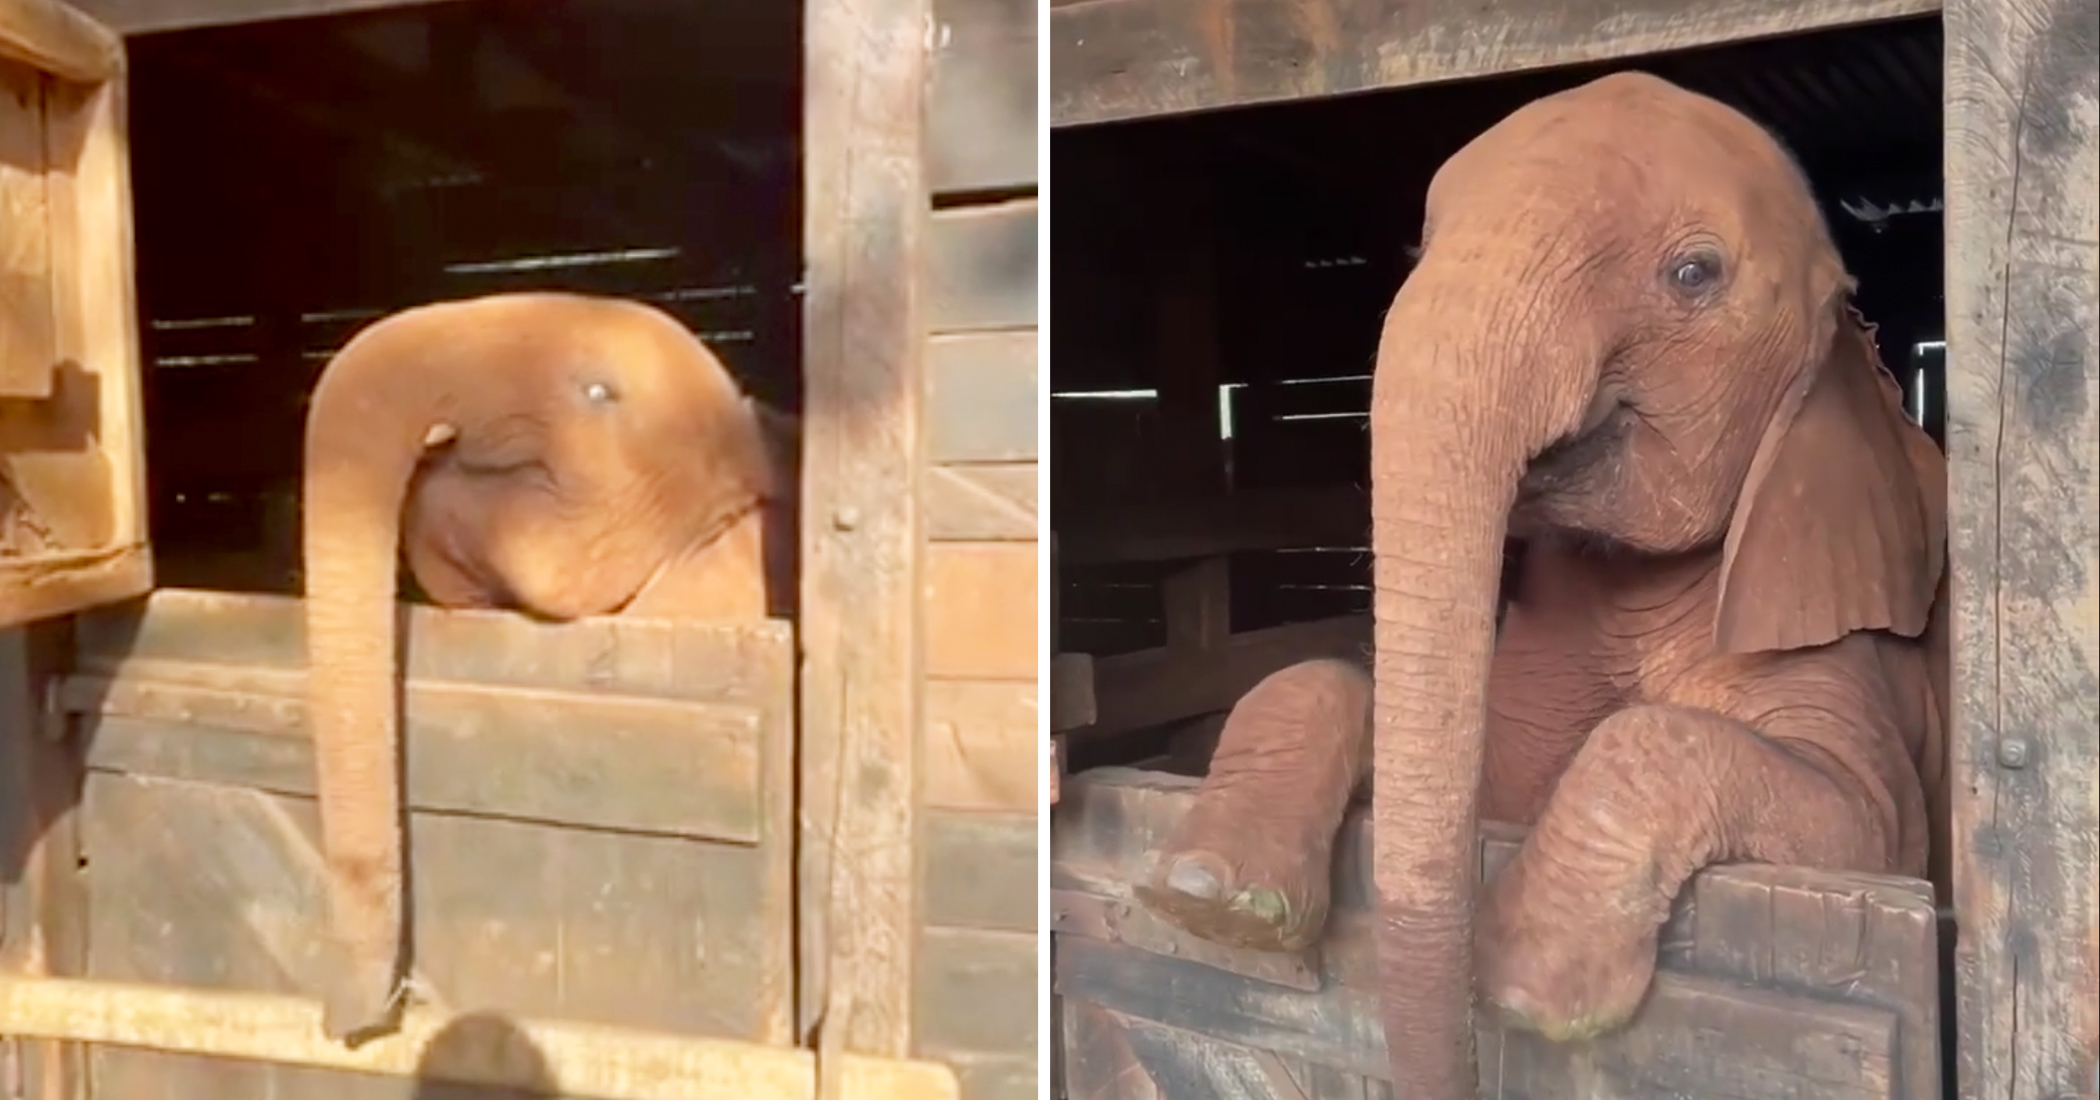 VIDEO: Rescued baby elephant refuses to go to sleep, adorably protests bedtime